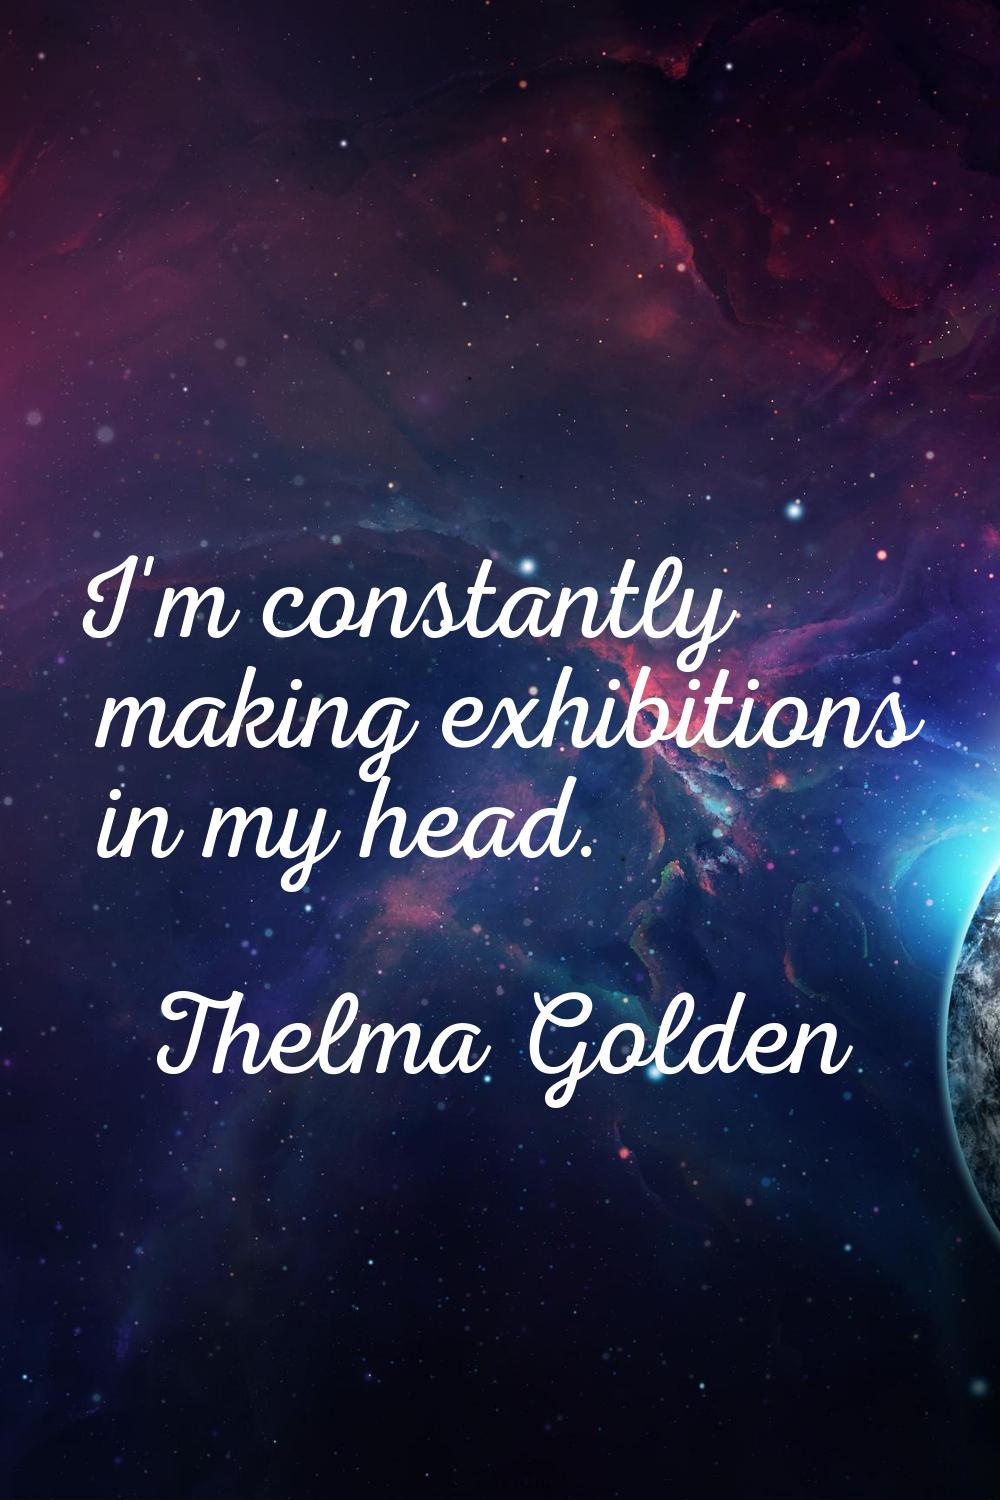 I'm constantly making exhibitions in my head.